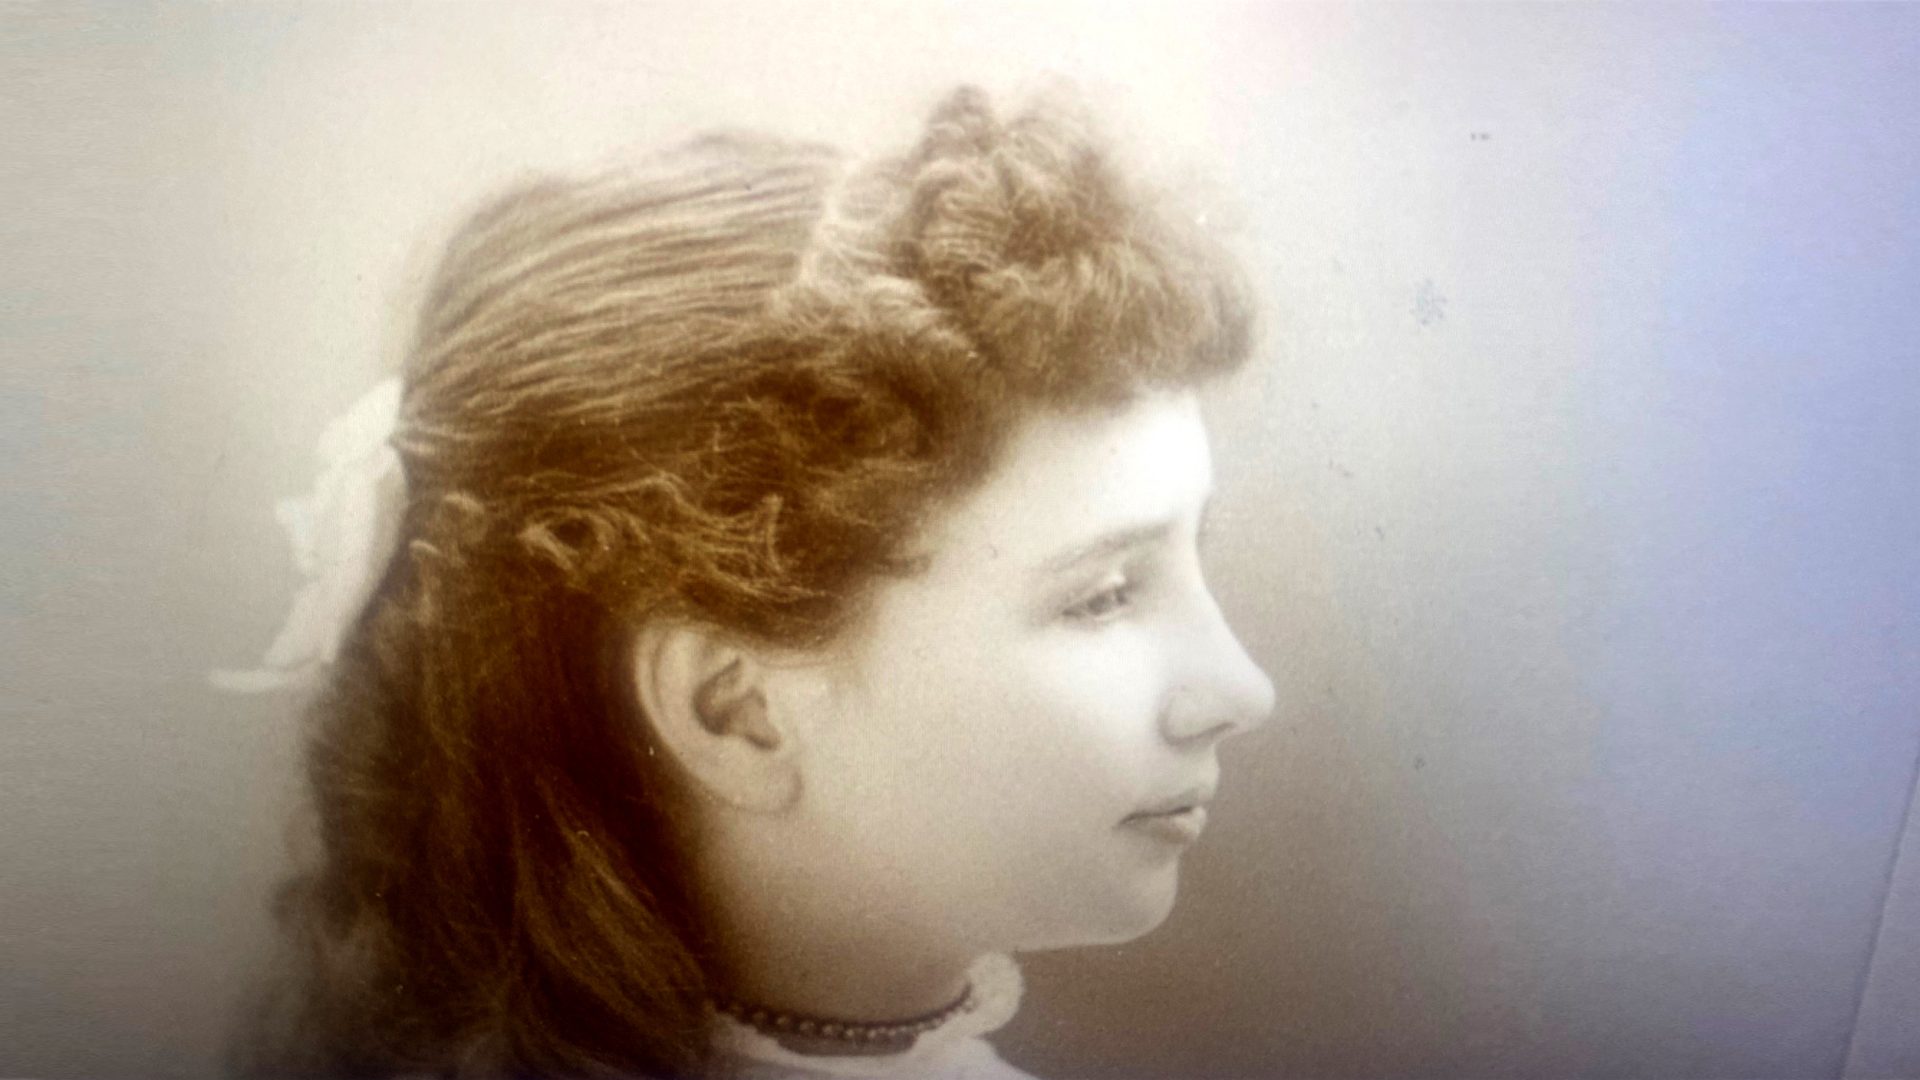 Studio photo of a young girl, about 10. Her hair has been styled with fluffy bangs and long curls.